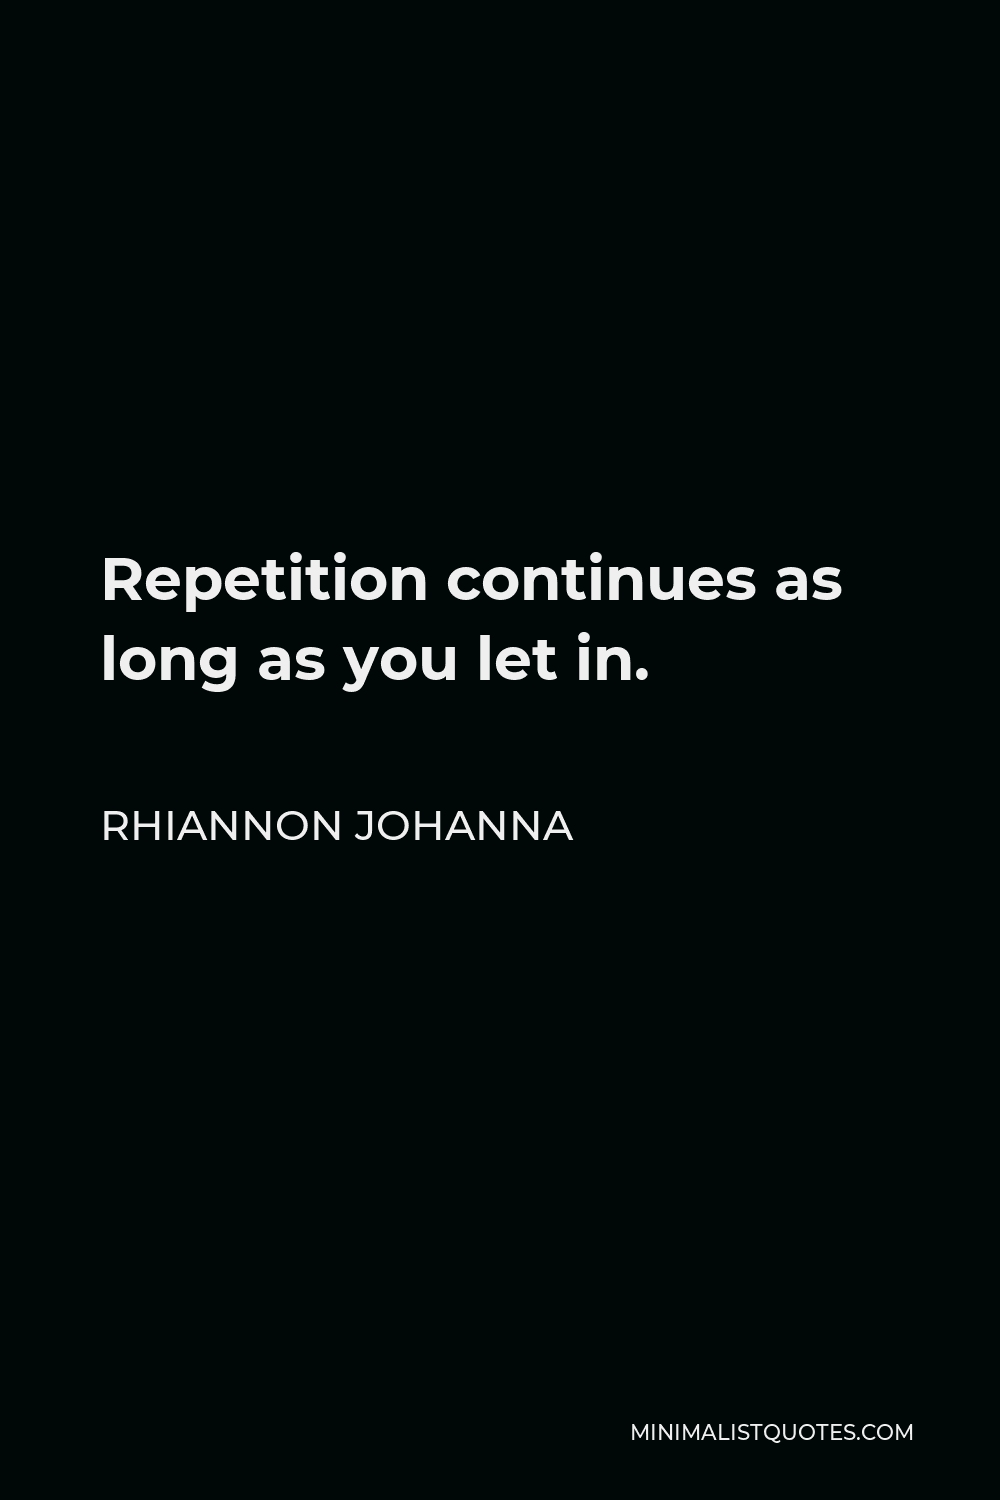 Rhiannon Johanna Quote - Repetition continues as long as you let in.